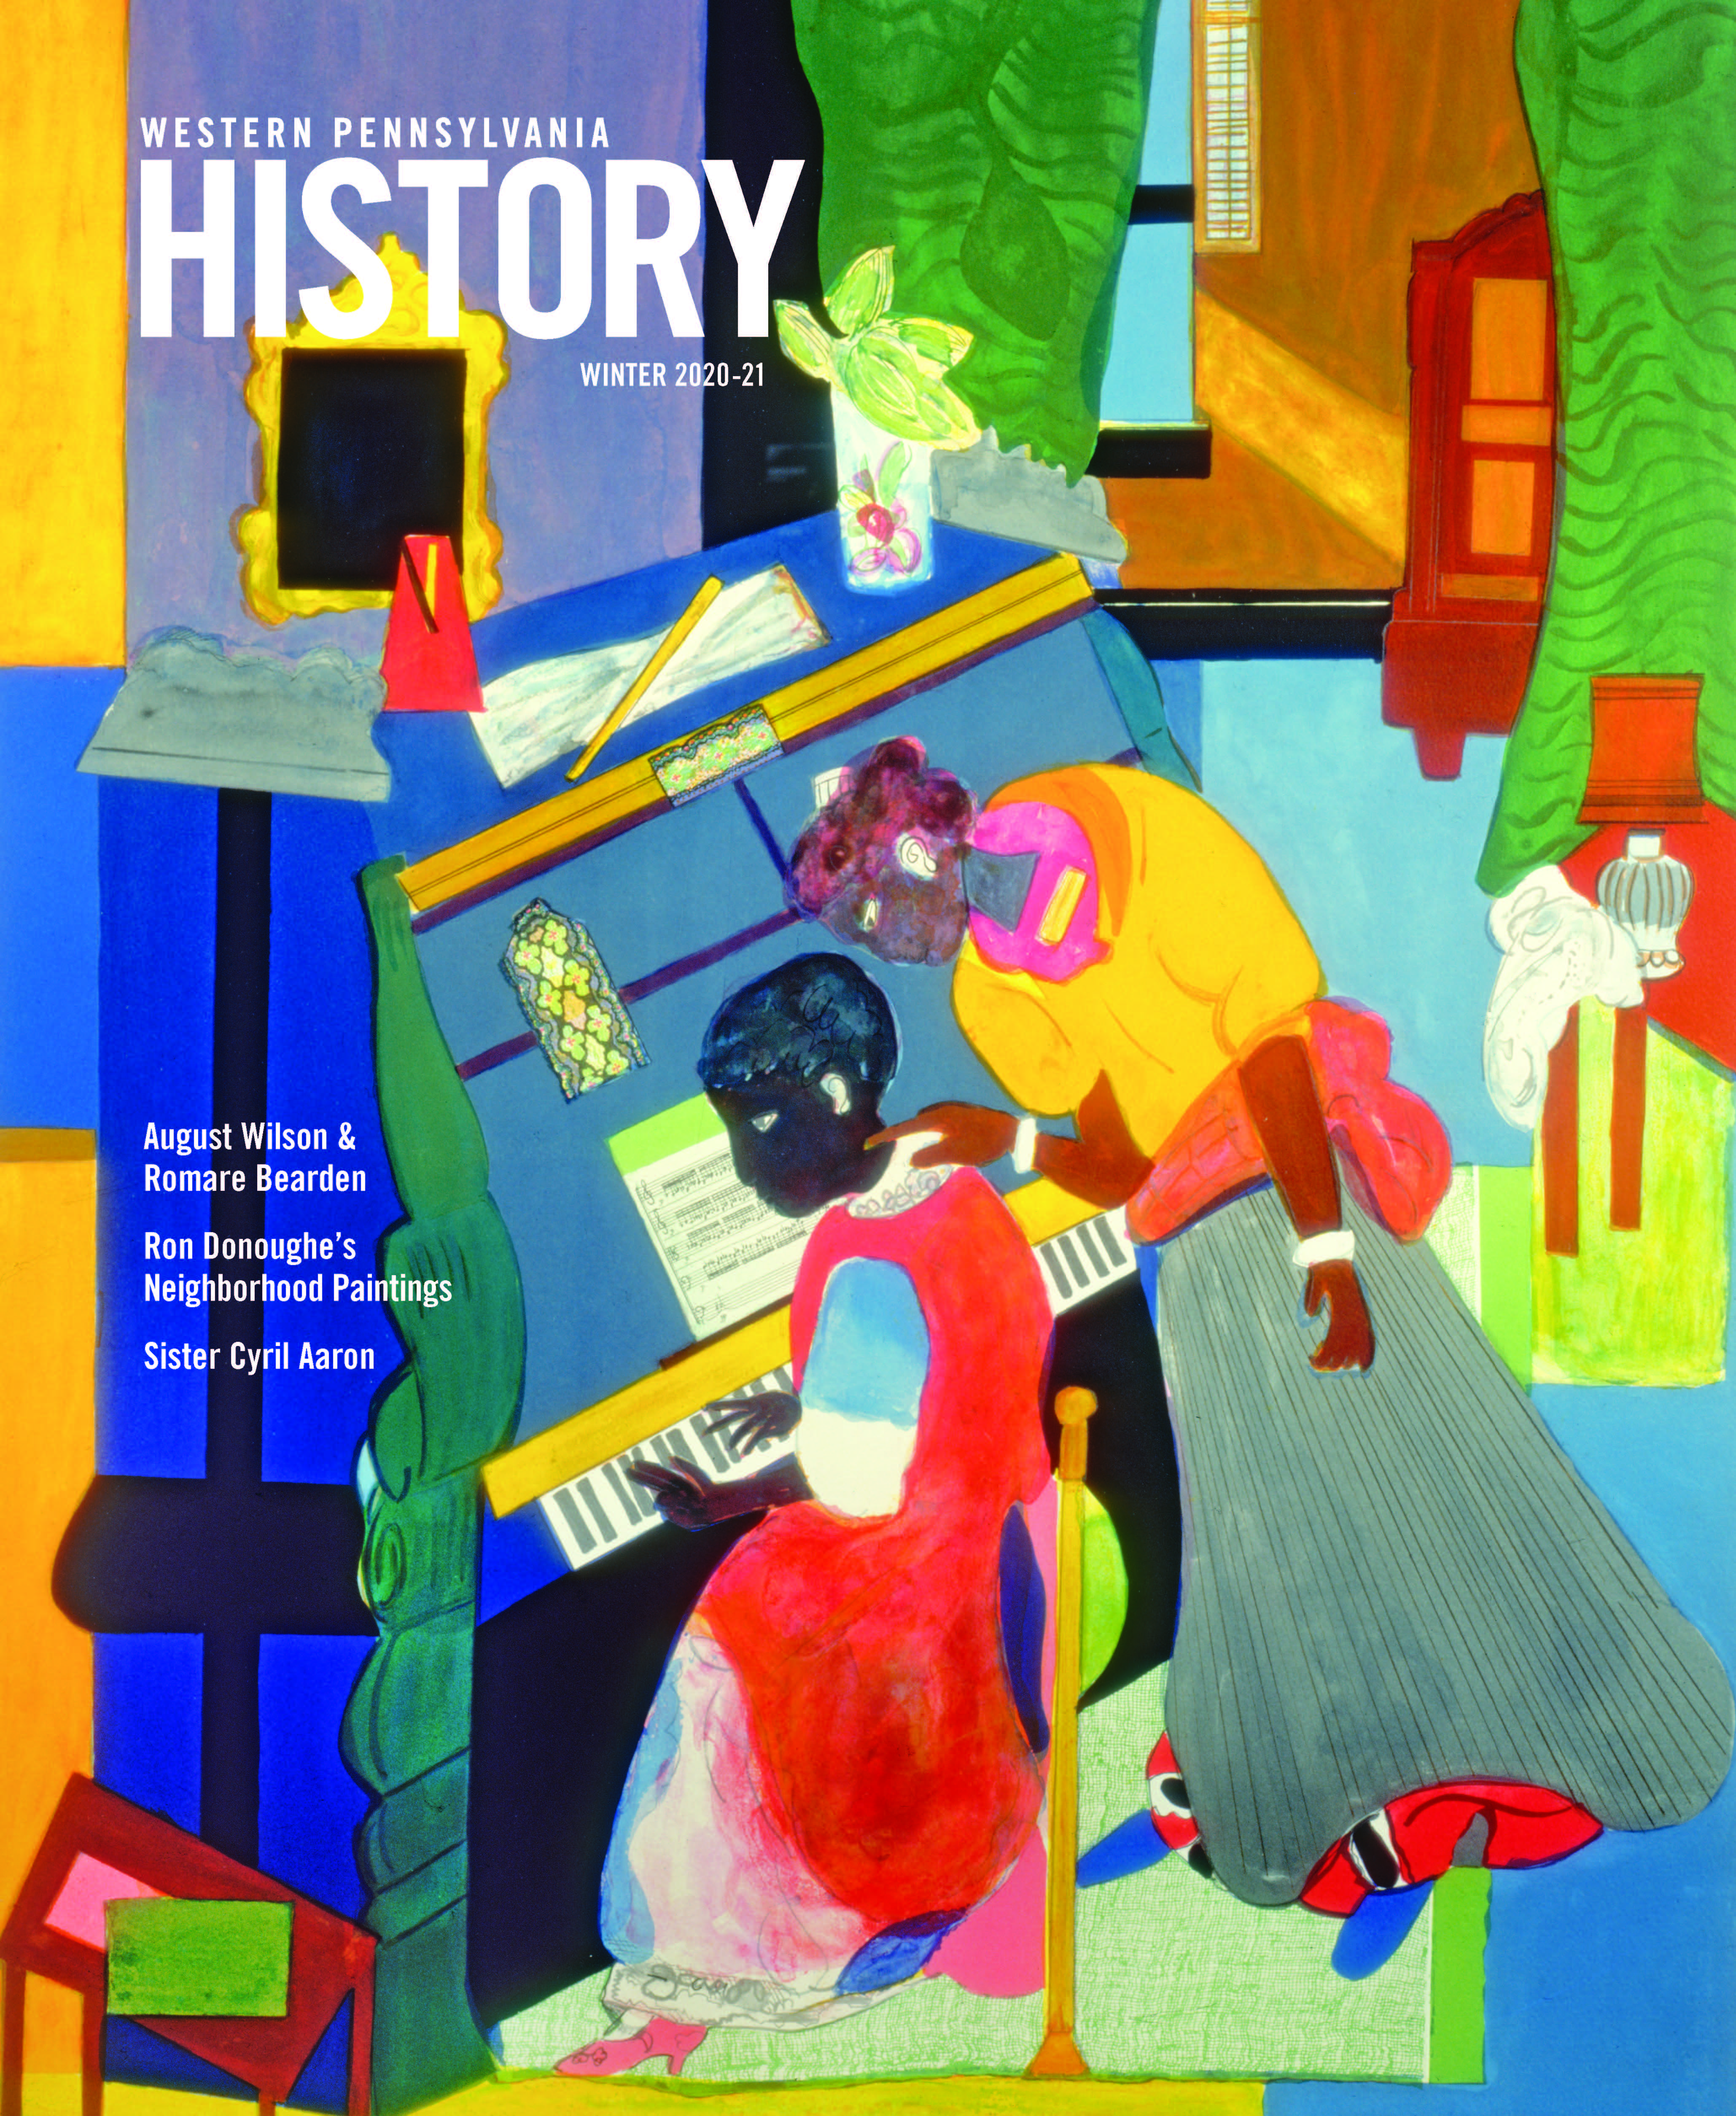 Magazine cover with artwork depicting a piano teacher and her pupil in a colorful room.